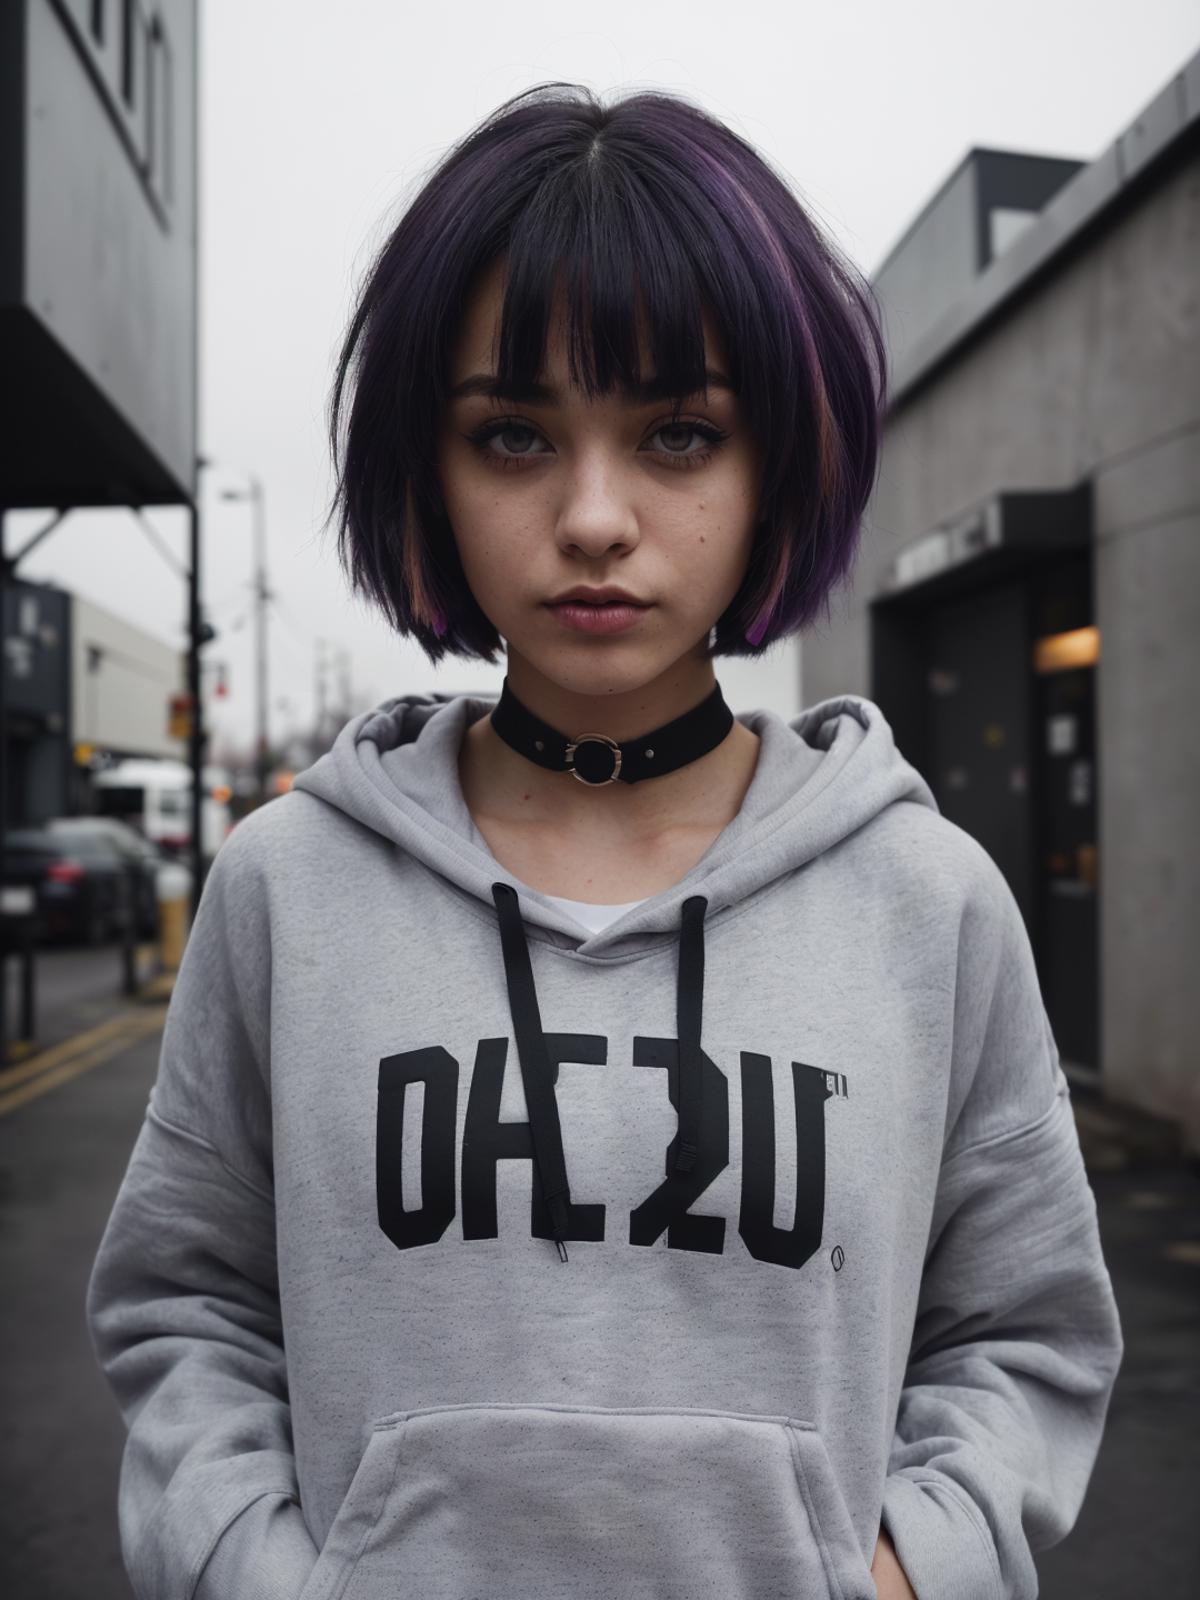 A young woman with purple hair and a black choker necklace wearing a grey hoodie.